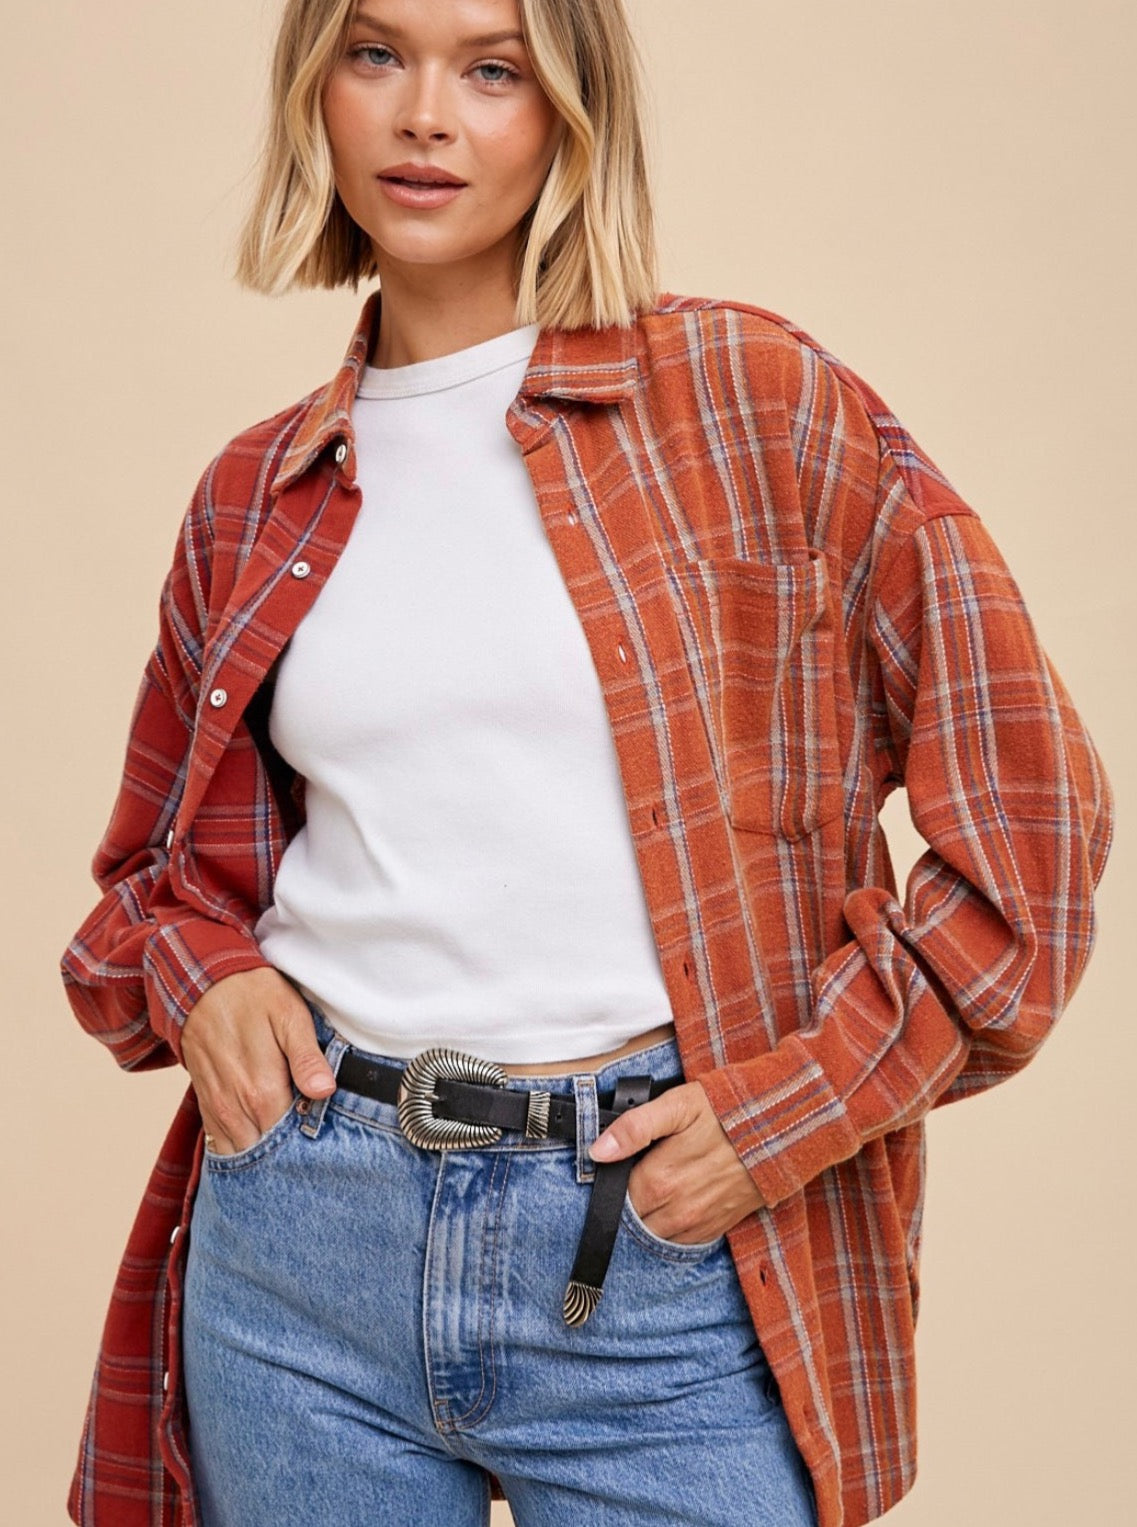 Two Tone Plaid in rust